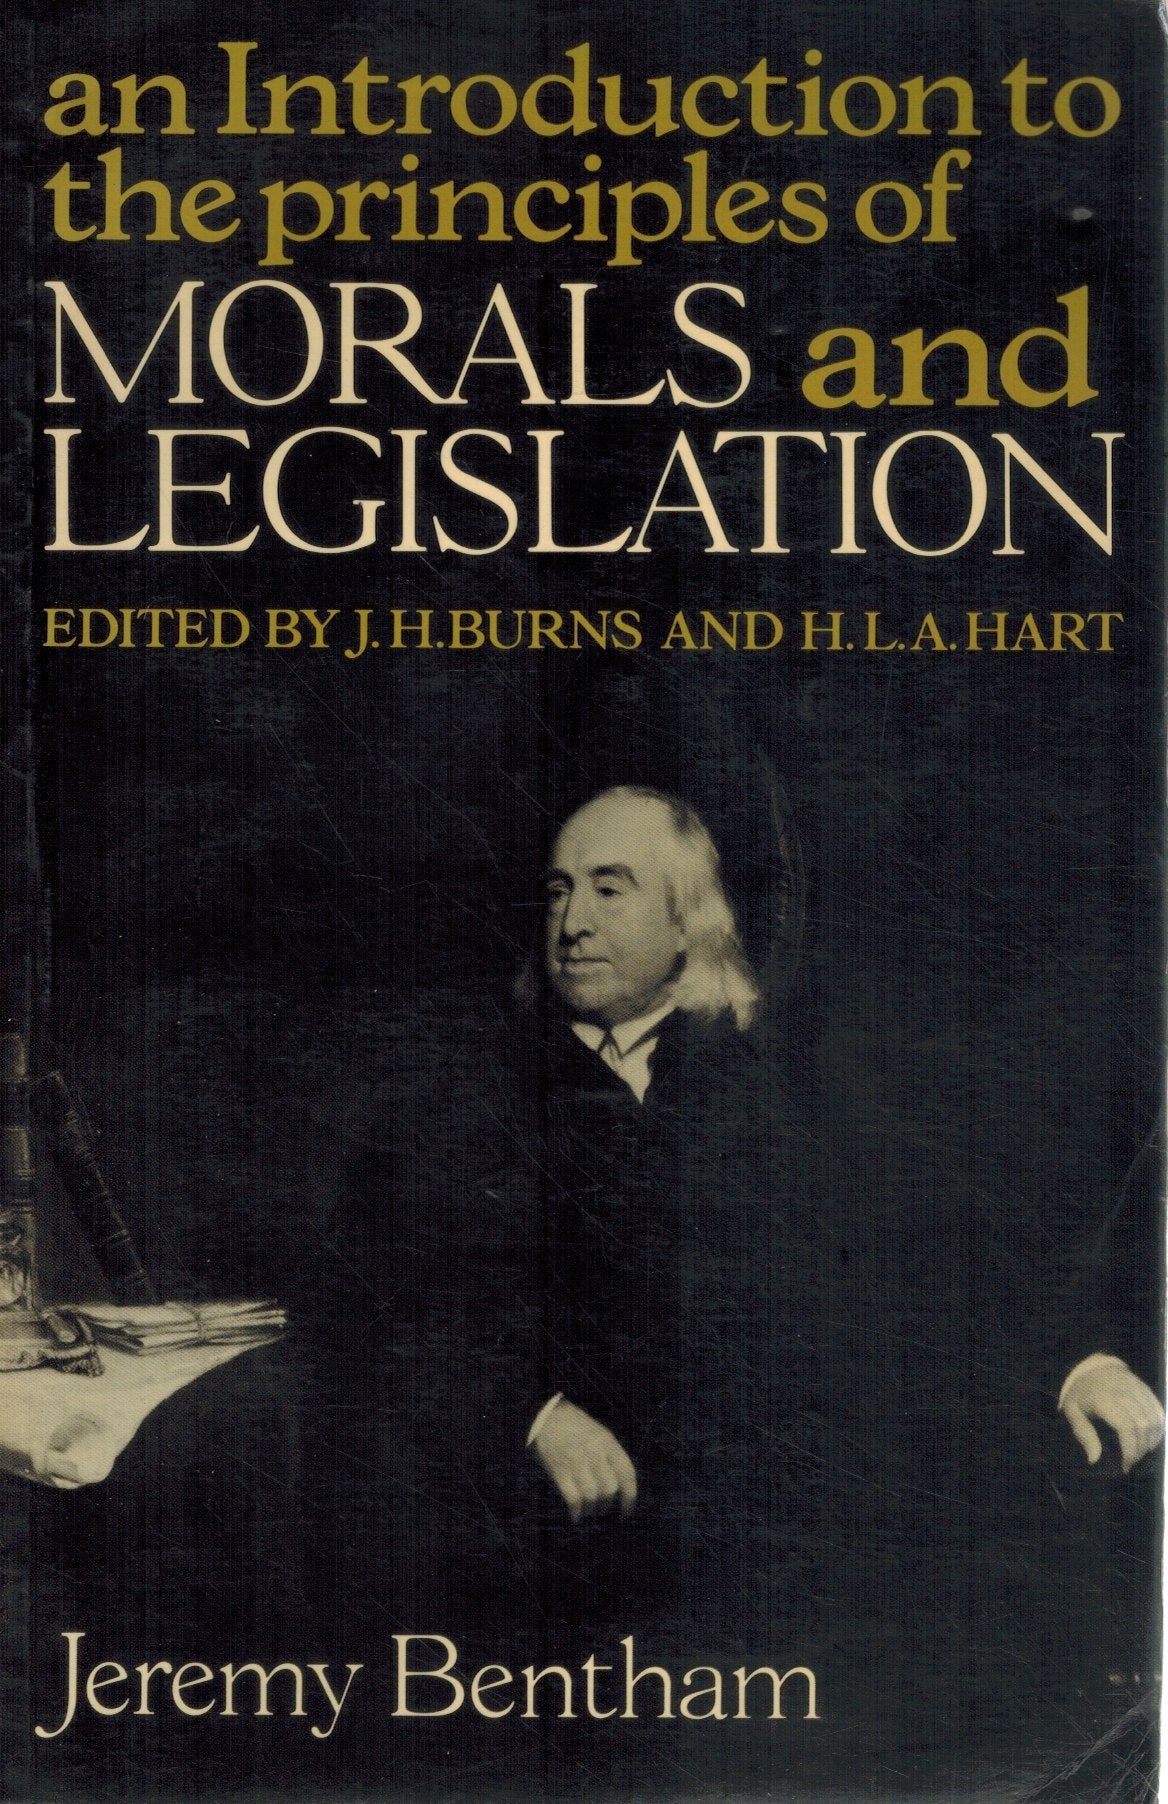 AN INTRODUCTION TO THE PRINCIPLES OF MORALS AND LEGISLATION  by Bentham, Jeremy